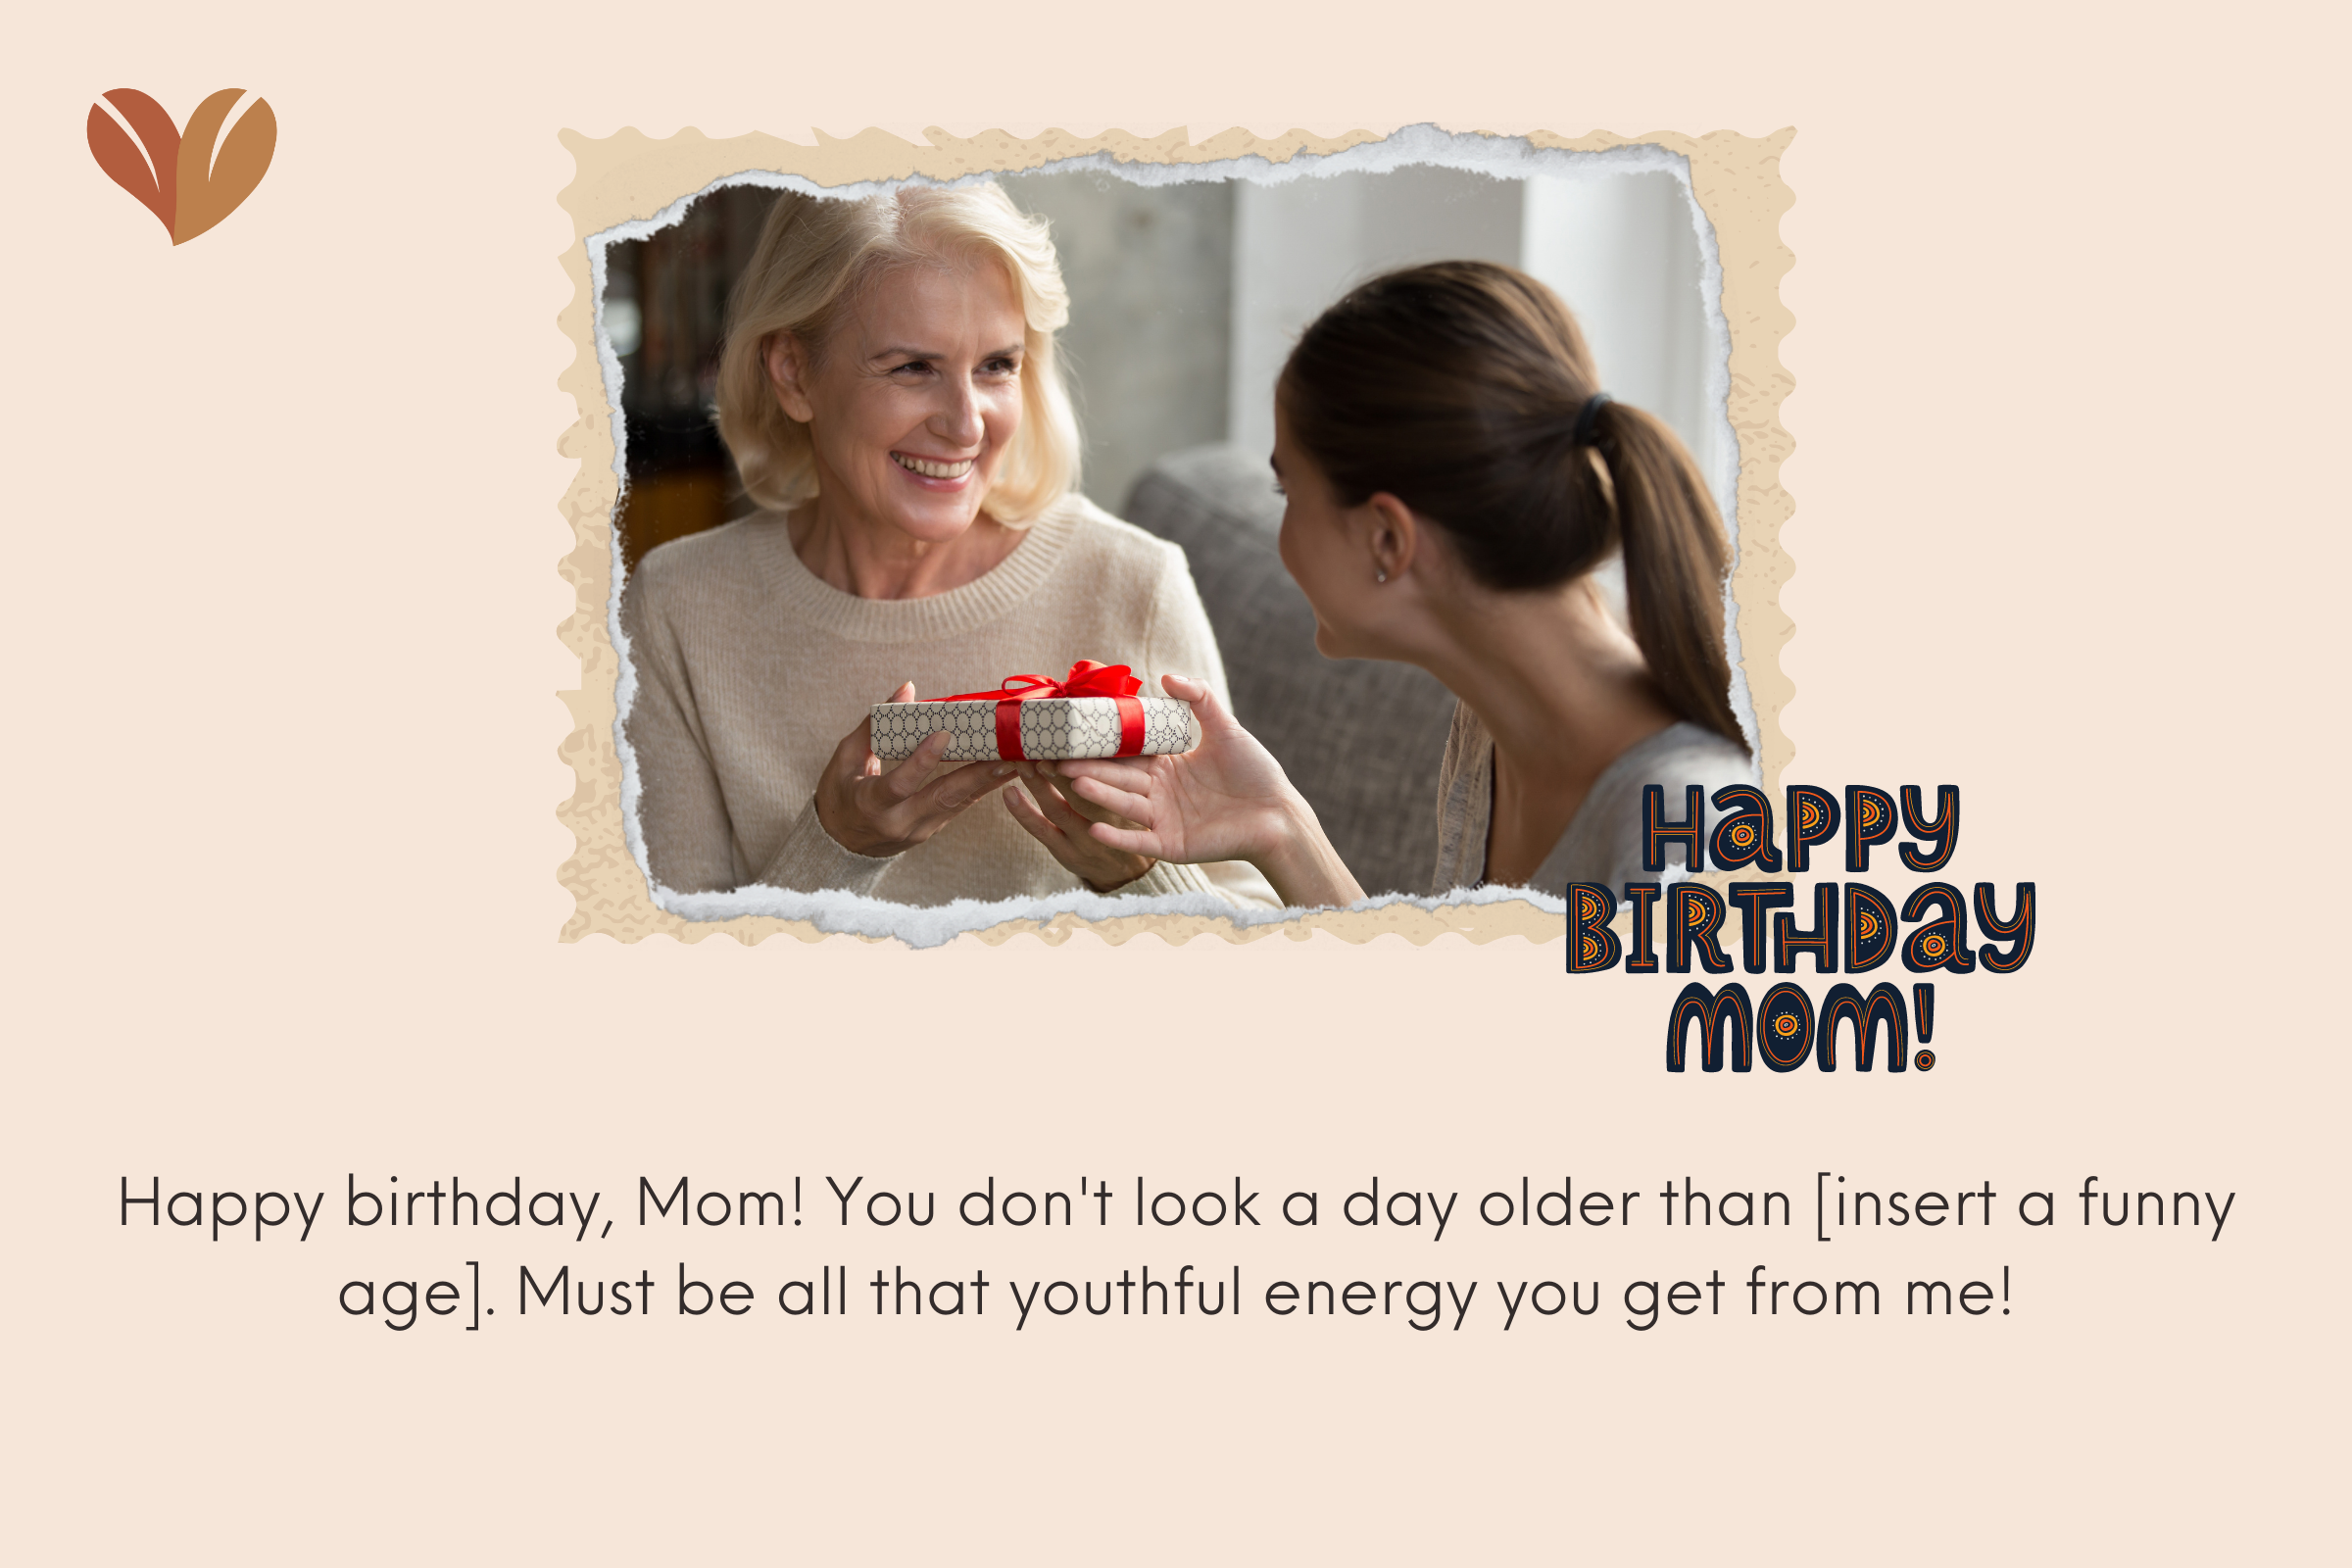 Warming Birthday captions for mother